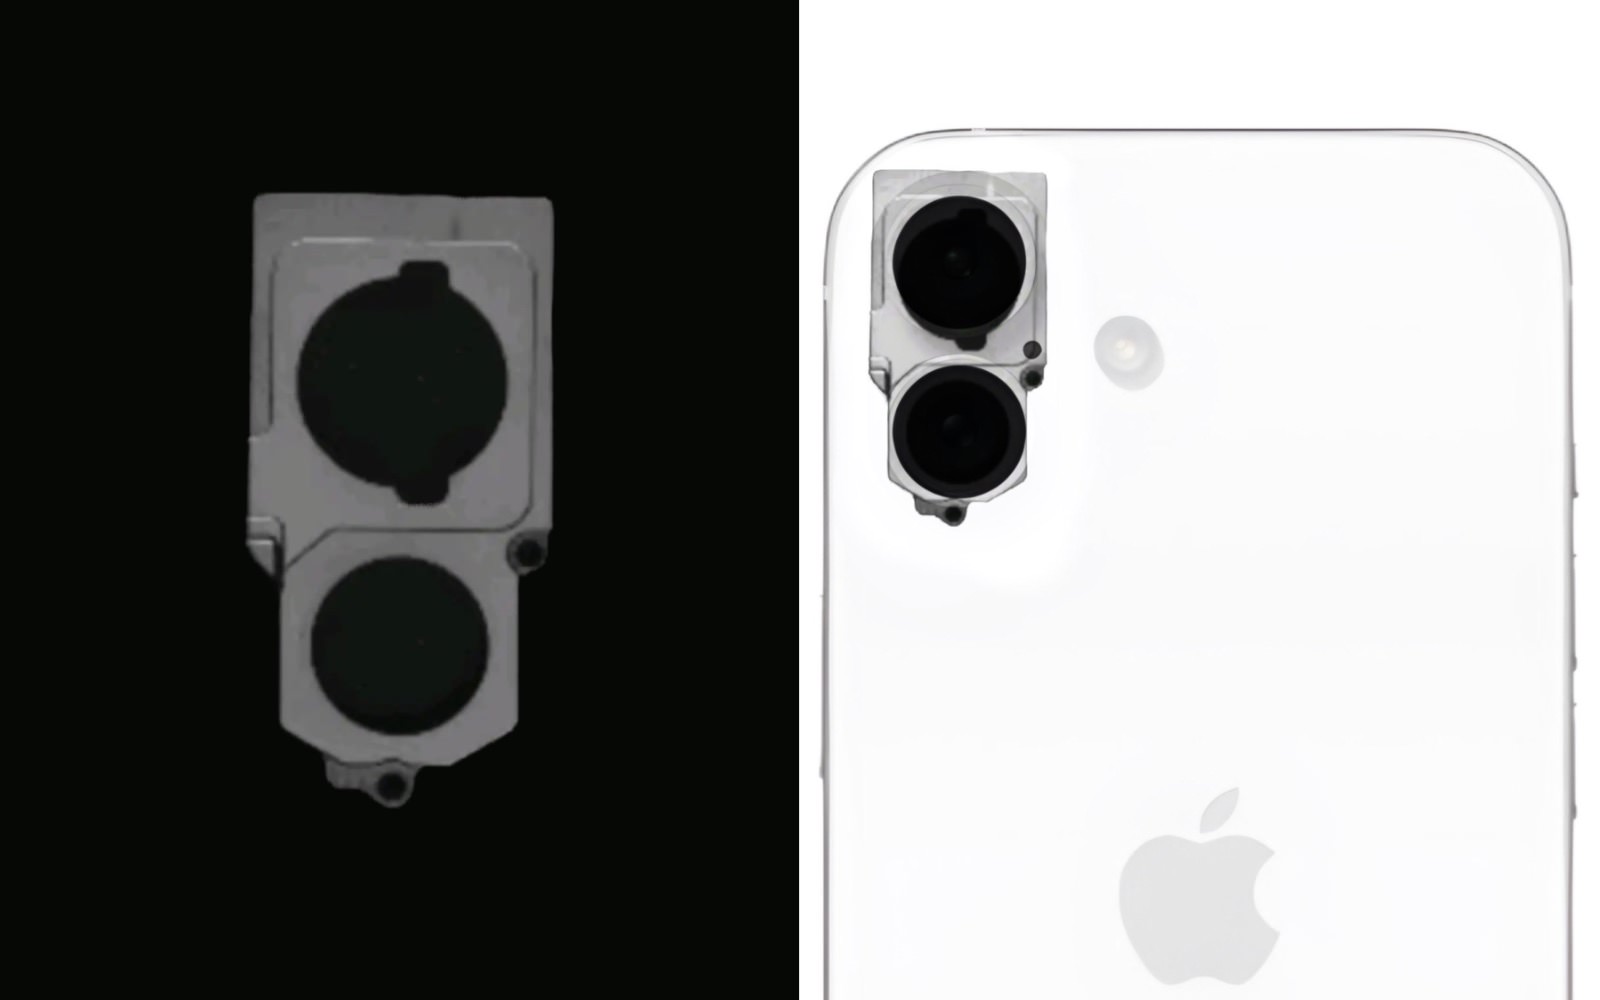 Iphone16 leaked component